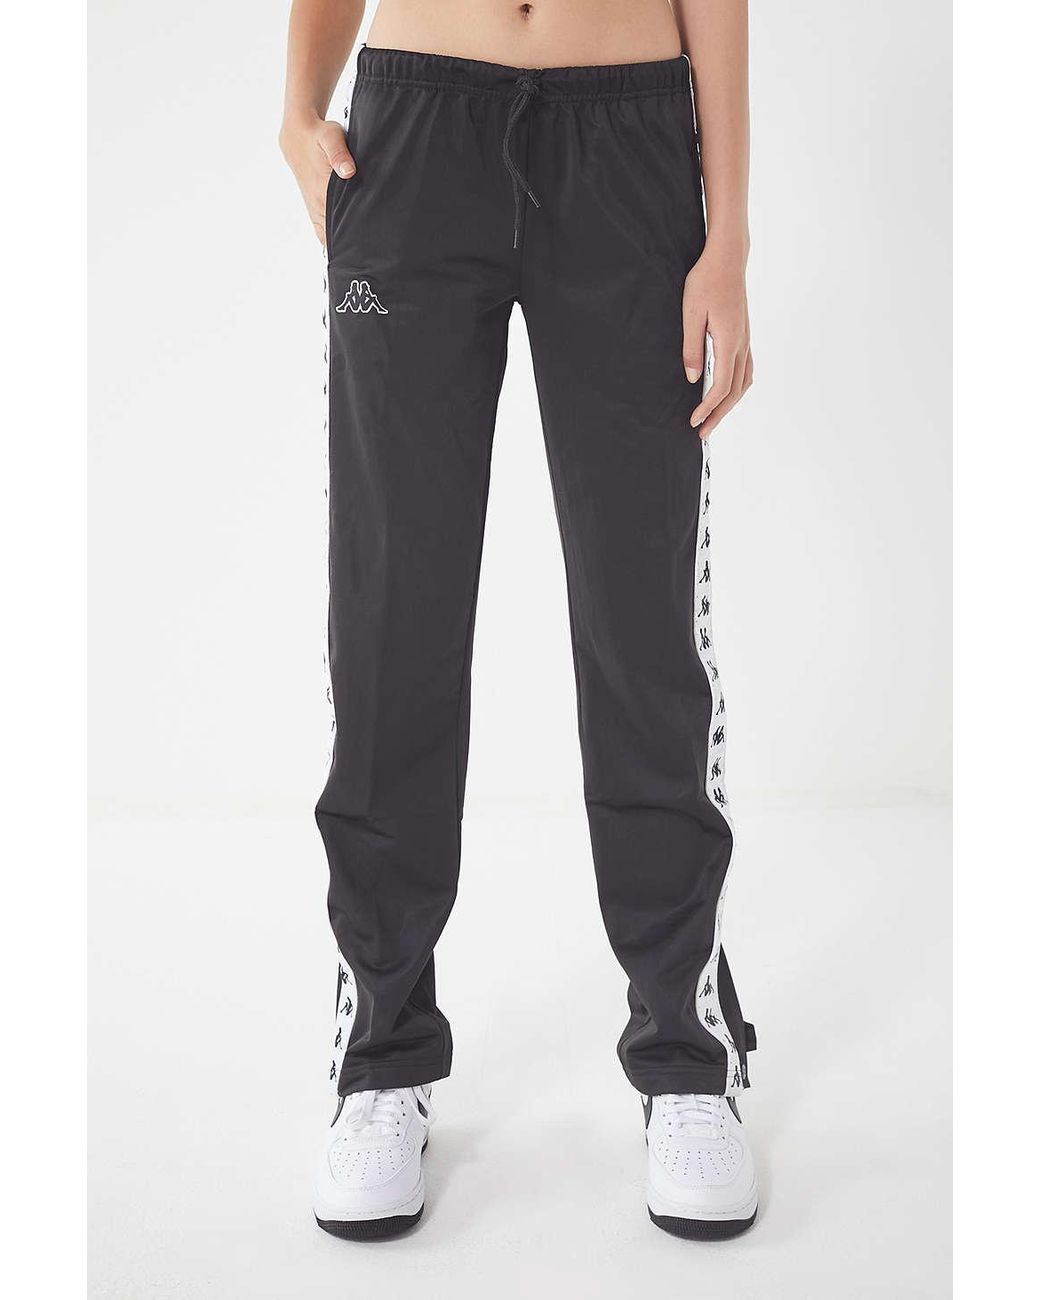 Kappa Womens Wise Authentic Pant | Grey | Footasylum | Tracksuit women,  Clothes, Track pants outfit